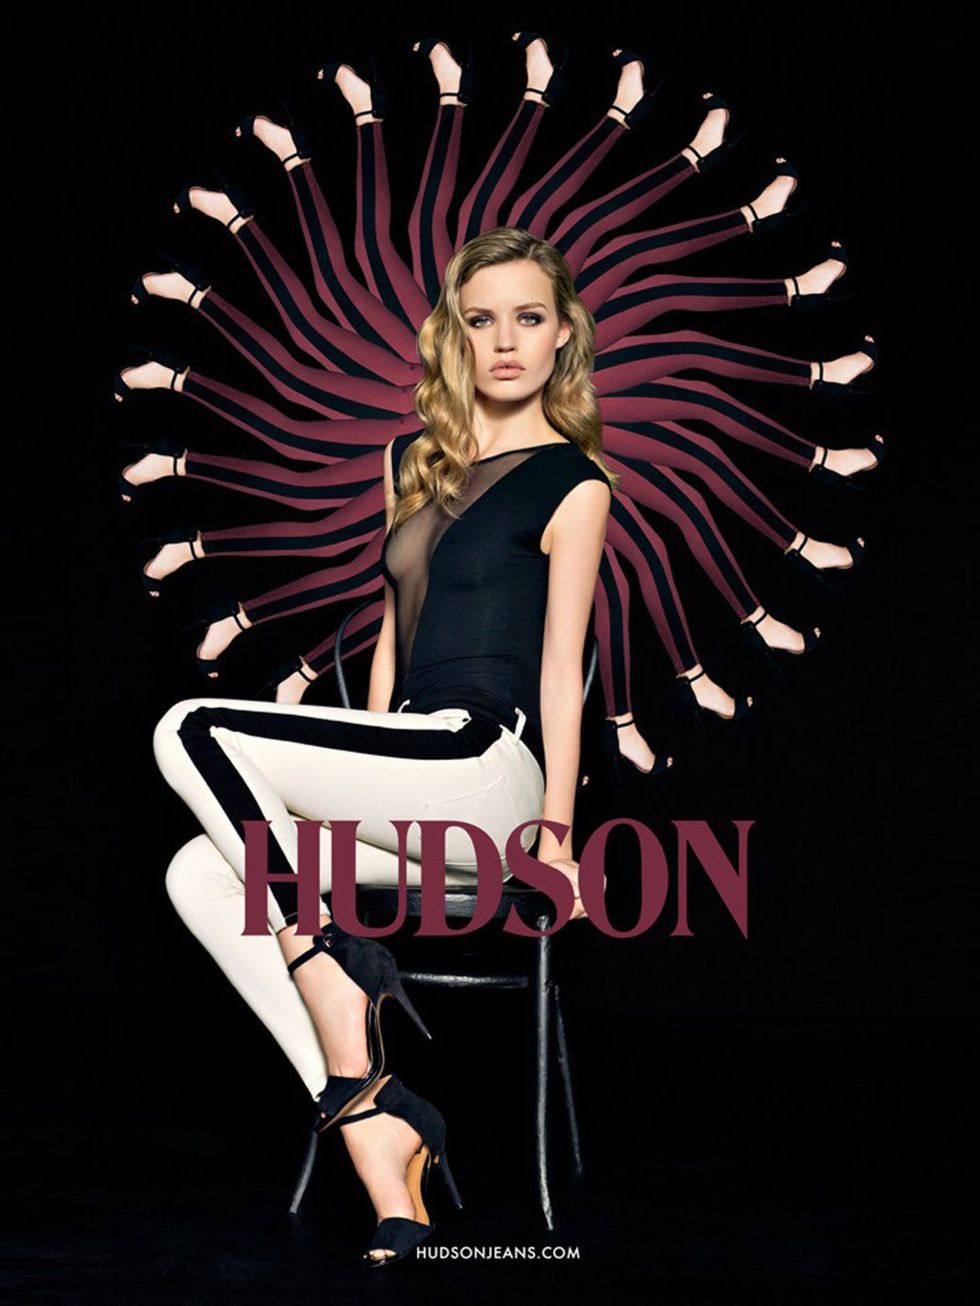 <p>Georgia May Jagger in the Hudson 10th Anniversary campaign</p>